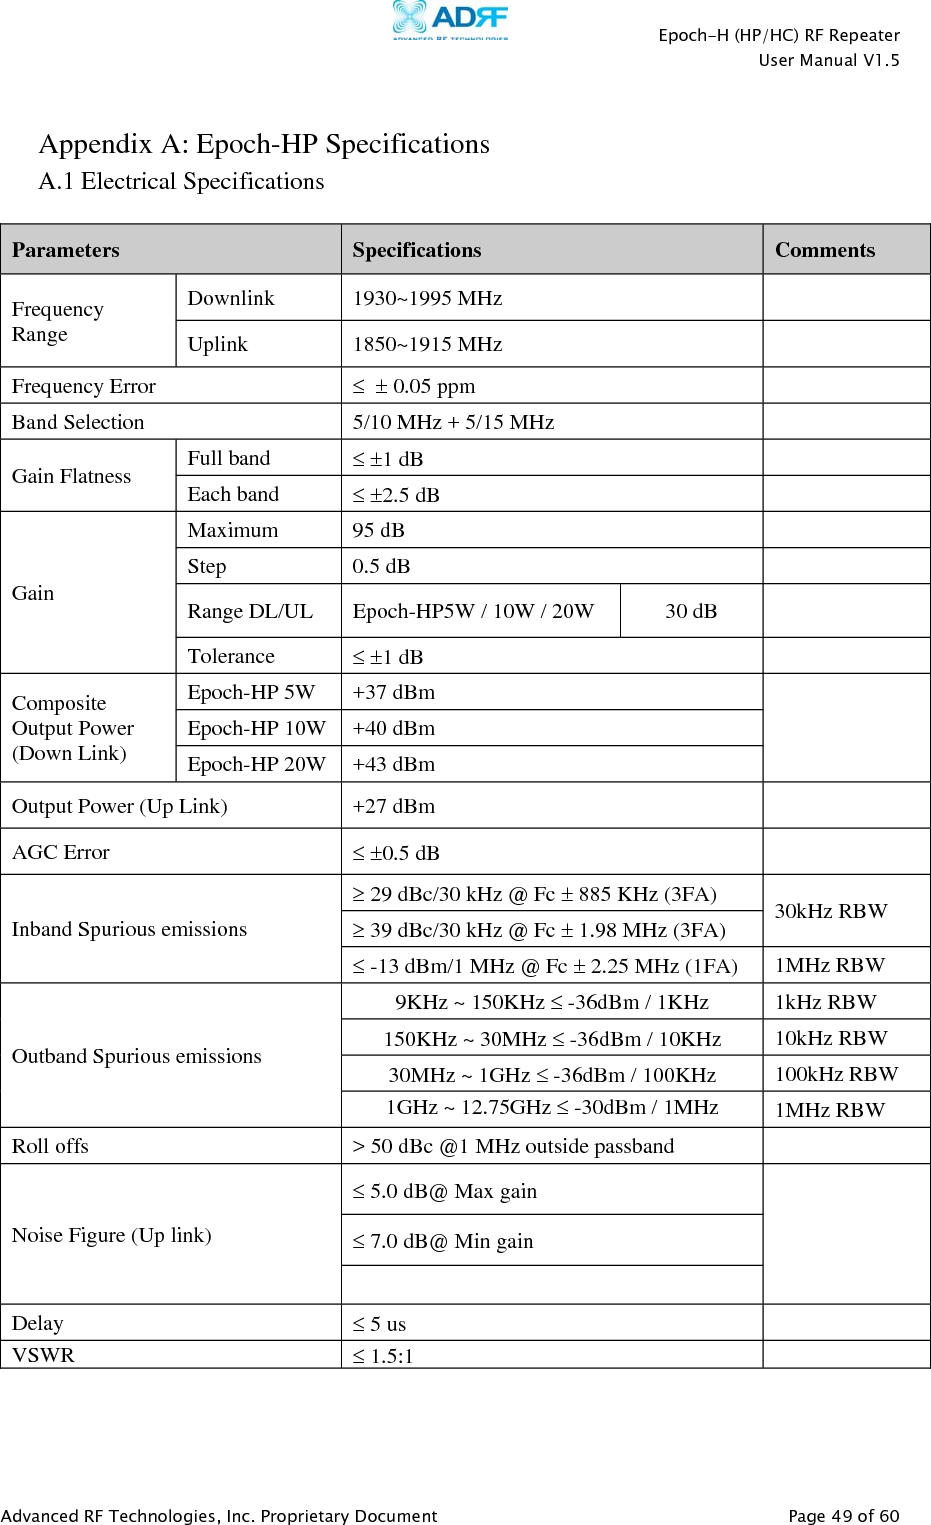    Epoch-H (HP/HC) RF Repeater  User Manual V1.5  Advanced RF Technologies, Inc. Proprietary Document   Page 49 of 60   Appendix A: Epoch-HP Specifications A.1 Electrical Specifications  Parameters  Specifications  Comments Frequency Range Downlink 1930~1995 MHz   Uplink 1850~1915 MHz   Frequency Error     0.05 ppm   Band Selection  5/10 MHz + 5/15 MHz   Gain Flatness  Full band   1 dB   Each band   2.5 dB   Gain Maximum 95 dB   Step 0.5 dB   Range DL/UL  Epoch-HP5W / 10W / 20W  30 dB   Tolerance   1 dB   Composite Output Power (Down Link) Epoch-HP 5W  +37 dBm  Epoch-HP 10W  +40 dBm Epoch-HP 20W  +43 dBm Output Power (Up Link) +27 dBm   AGC Error   0.5 dB   Inband Spurious emissions  29 dBc/30 kHz @ Fc  885 KHz (3FA)  30kHz RBW  39 dBc/30 kHz @ Fc  1.98 MHz (3FA)  -13 dBm/1 MHz @ Fc  2.25 MHz (1FA)  1MHz RBW Outband Spurious emissions 9KHz ~ 150KHz  -36dBm / 1KHz  1kHz RBW 150KHz ~ 30MHz  -36dBm / 10KHz  10kHz RBW 30MHz ~ 1GHz  -36dBm / 100KHz  100kHz RBW 1GHz ~ 12.75GHz  -30dBm / 1MHz  1MHz RBW Roll offs  &gt; 50 dBc @1 MHz outside passband   Noise Figure (Up link)  5.0 dB@ Max gain   7.0 dB@ Min gain  Delay   5 us   VSWR  1.5:1    